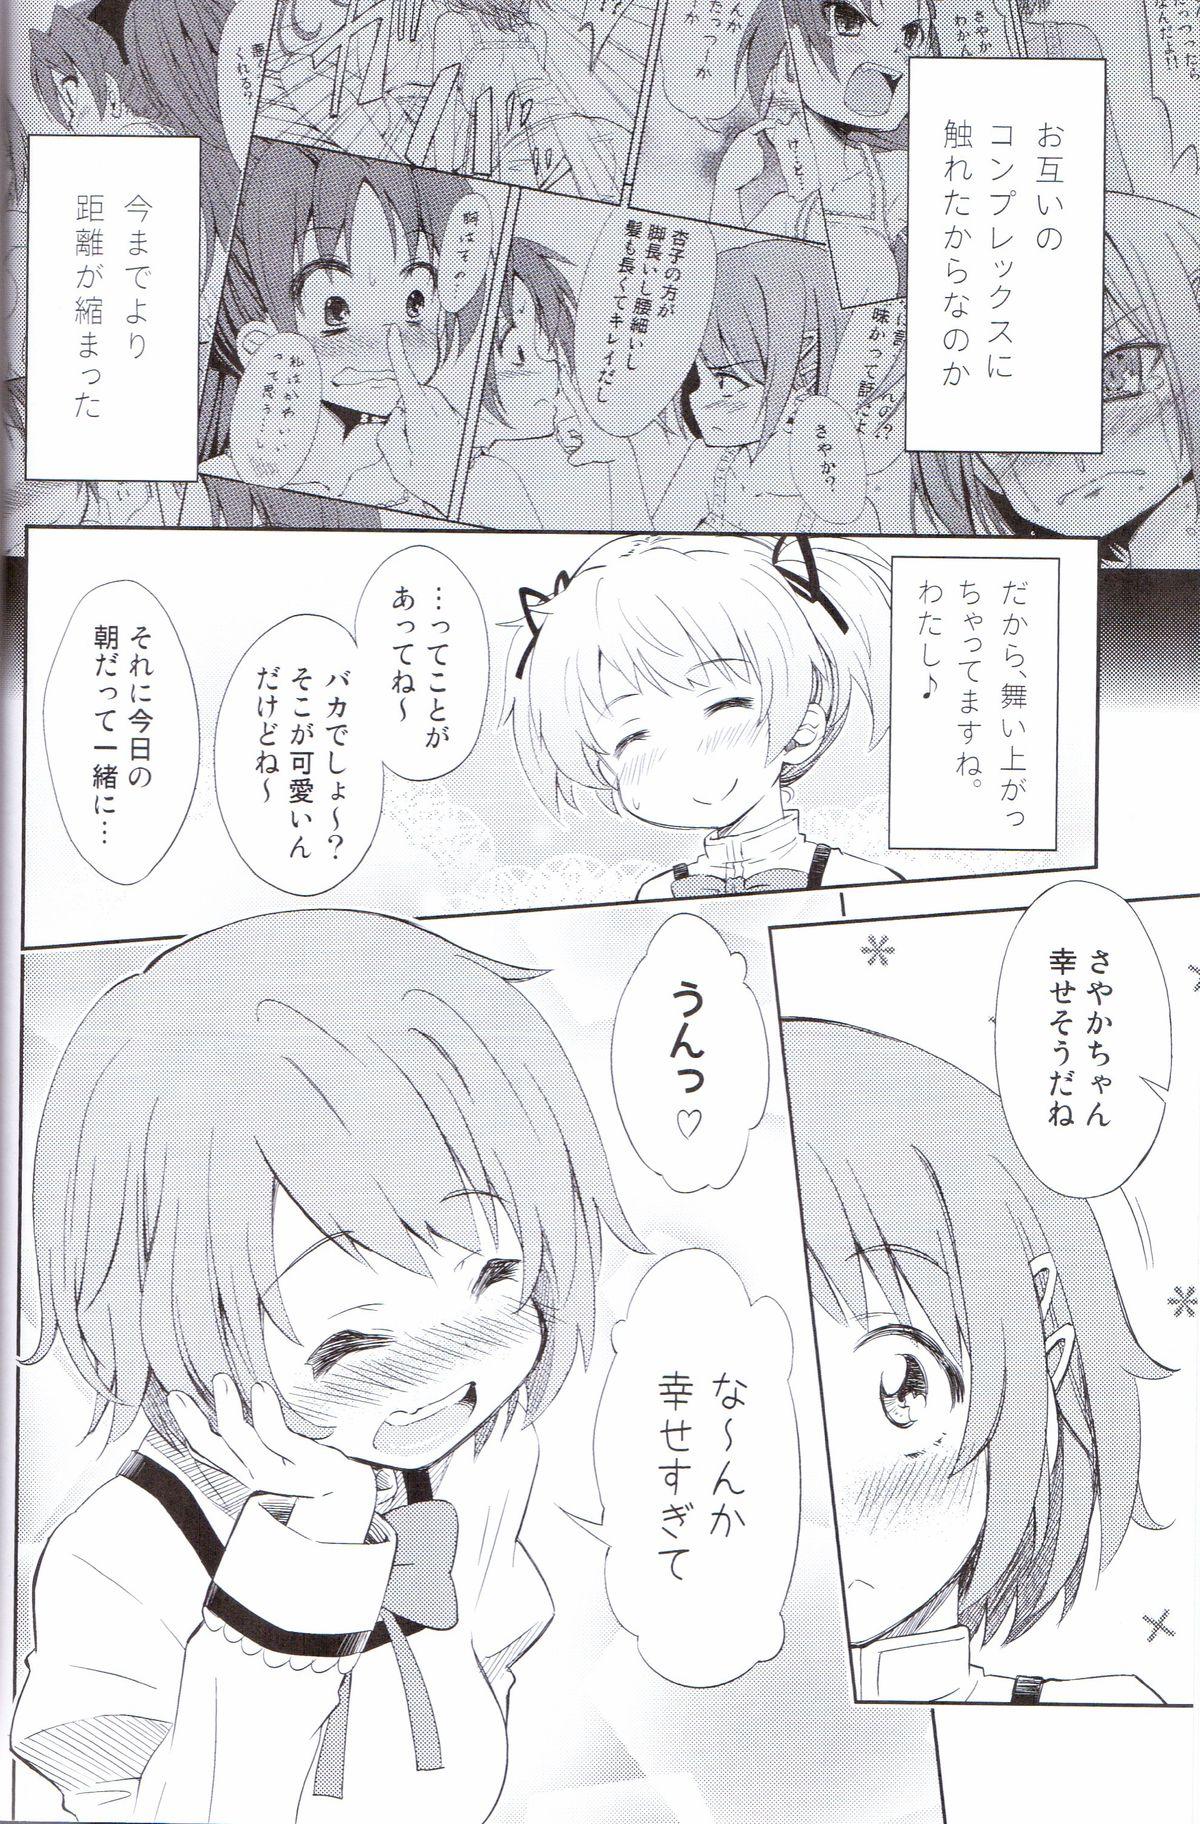 Mouth Lovely Girls' Lily vol. 5 - Puella magi madoka magica Pay - Page 5